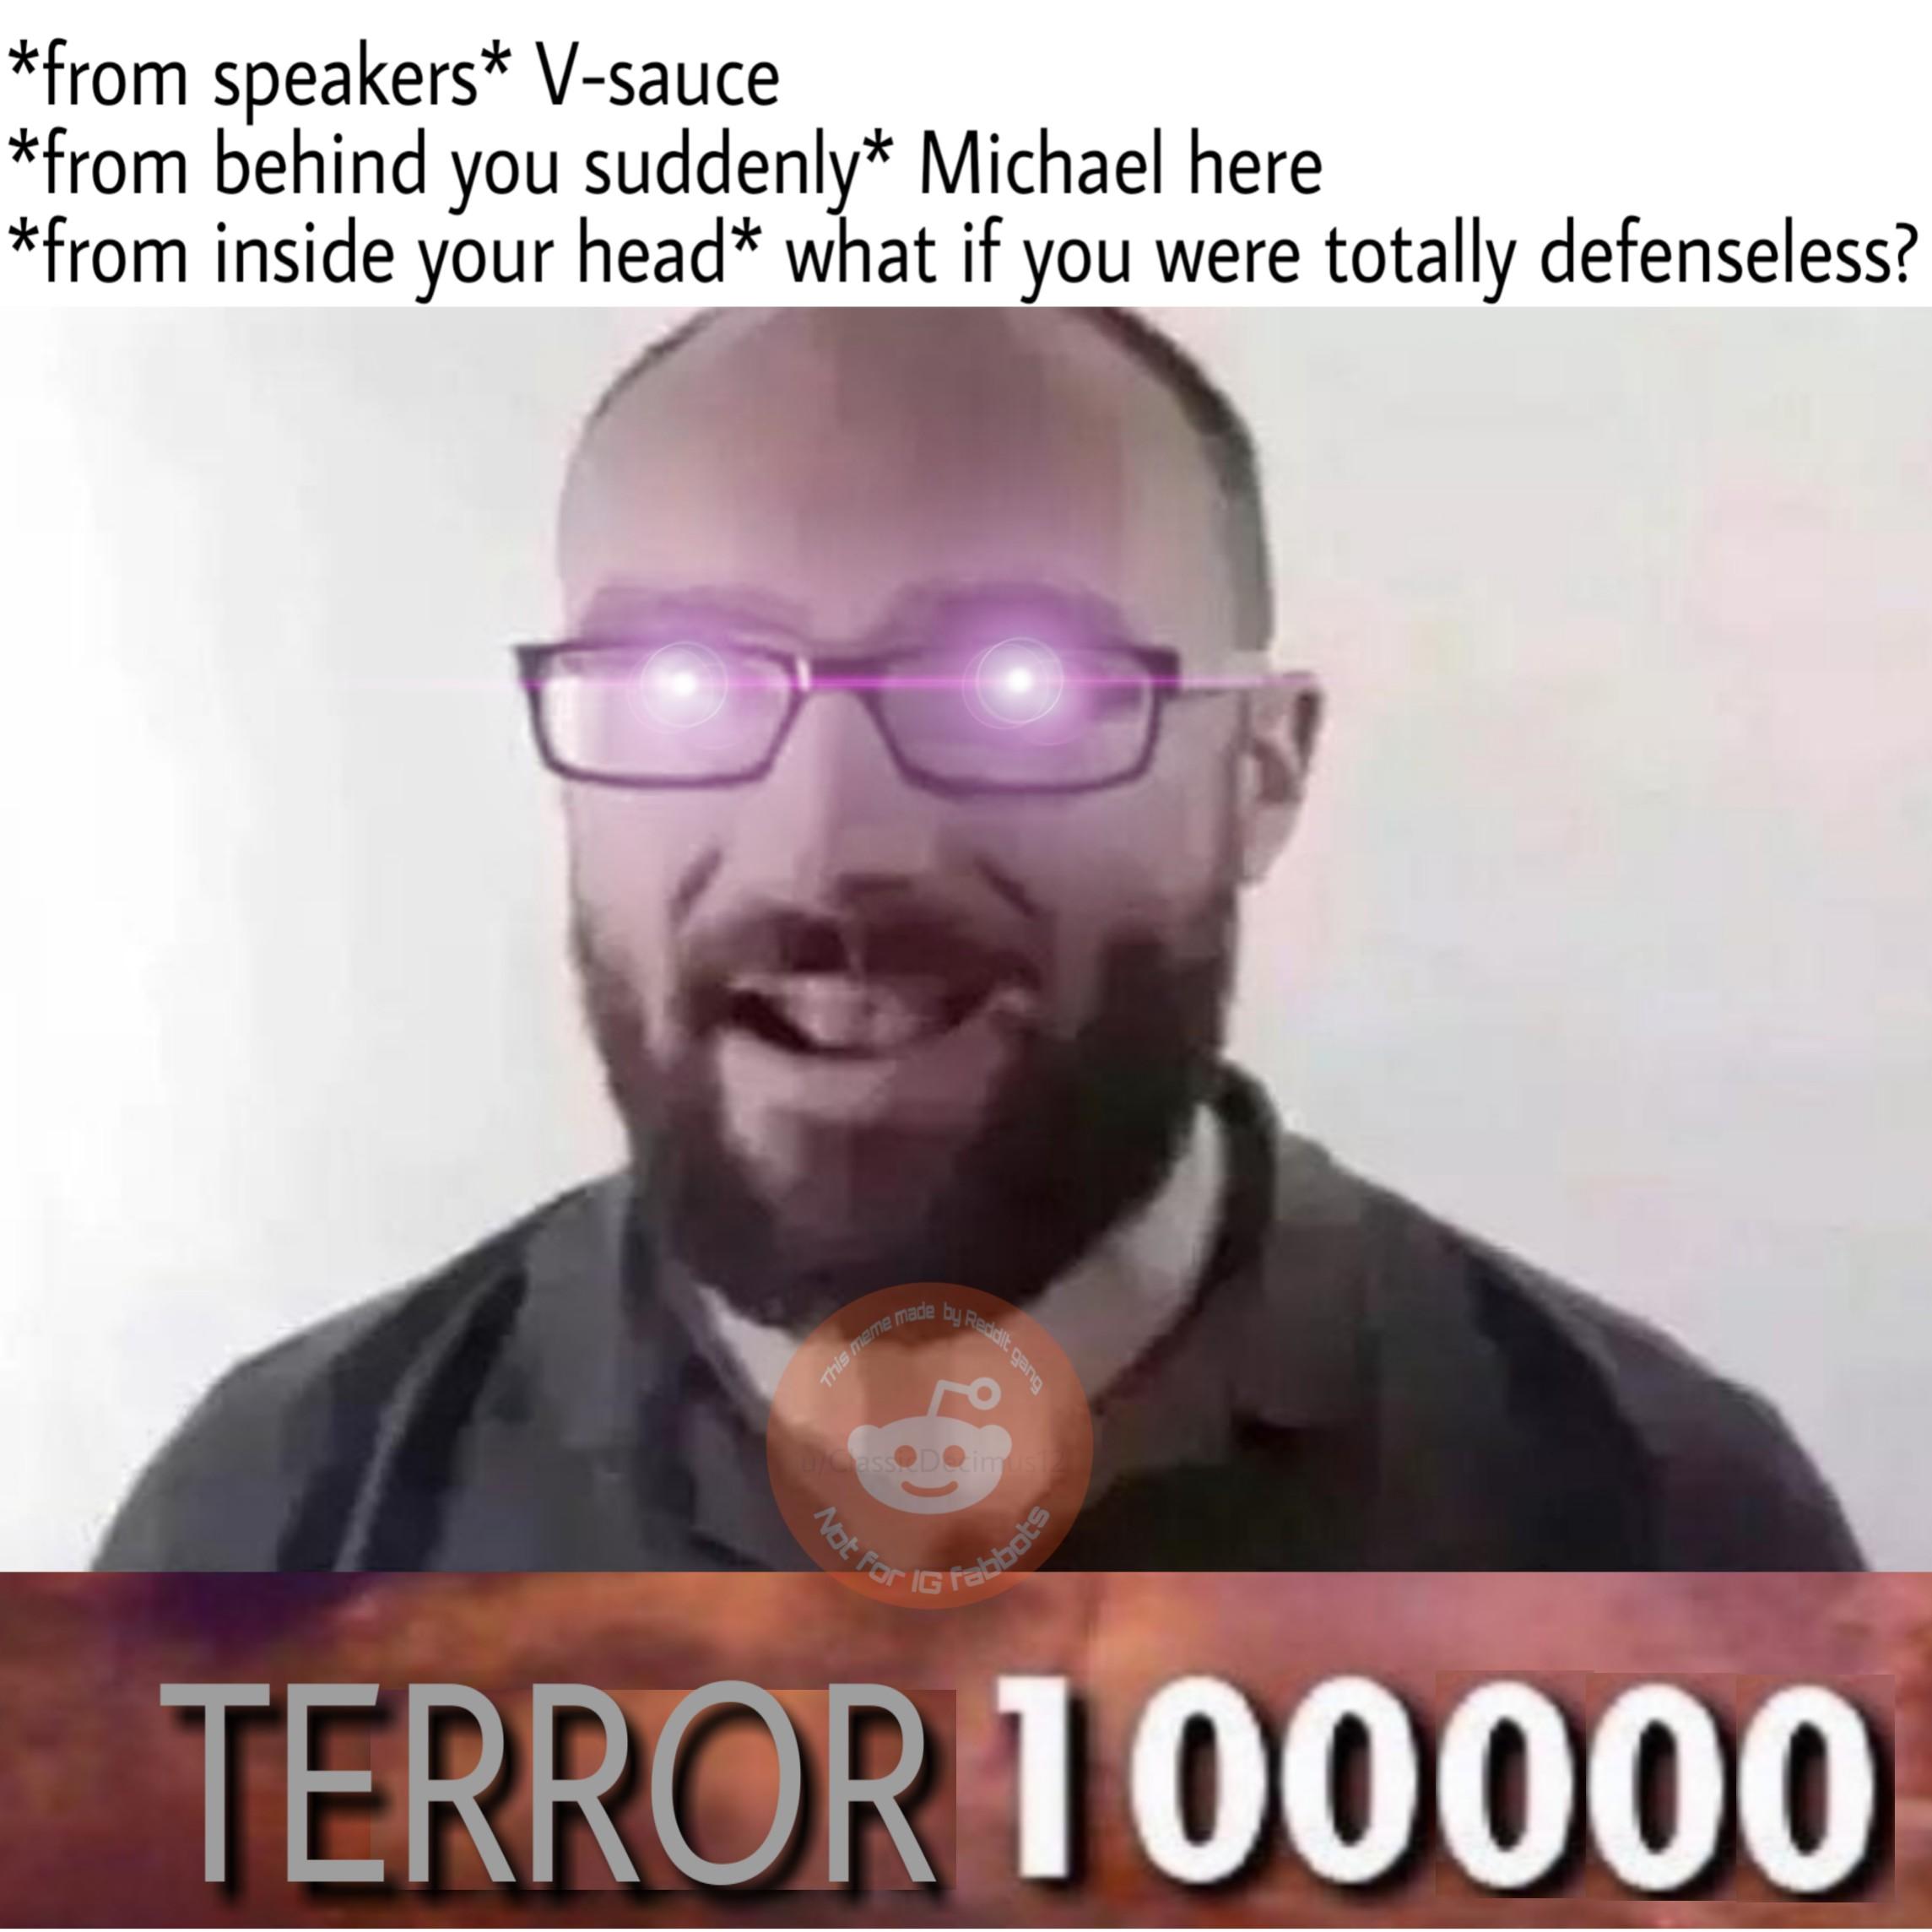 memes - japans age of consent - from speakers Vsauce from behind you suddenly Michael here from inside your head what if you were totally defenseless? This ieme is So gang Noe for Mabbats Terror 100000